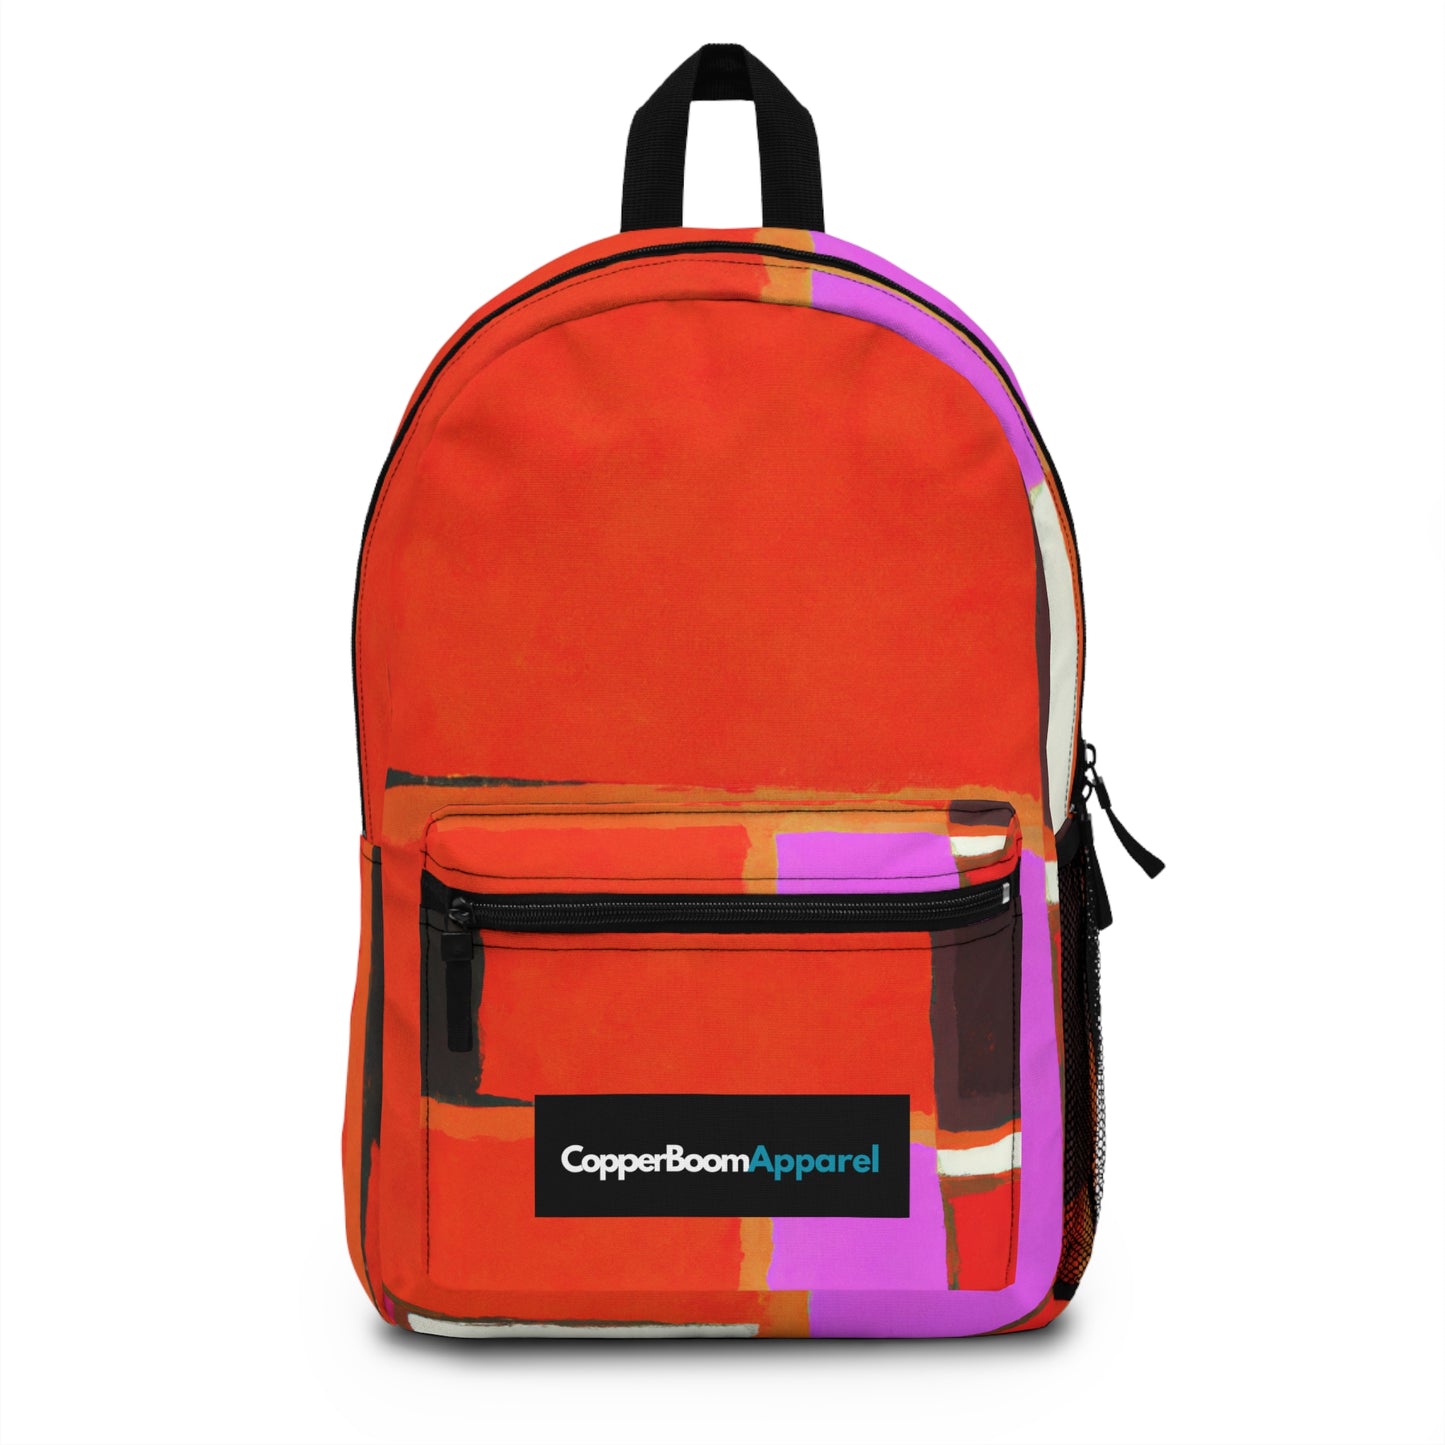 Can't Get Enough of Your Love, Babe 202375 - Backpack